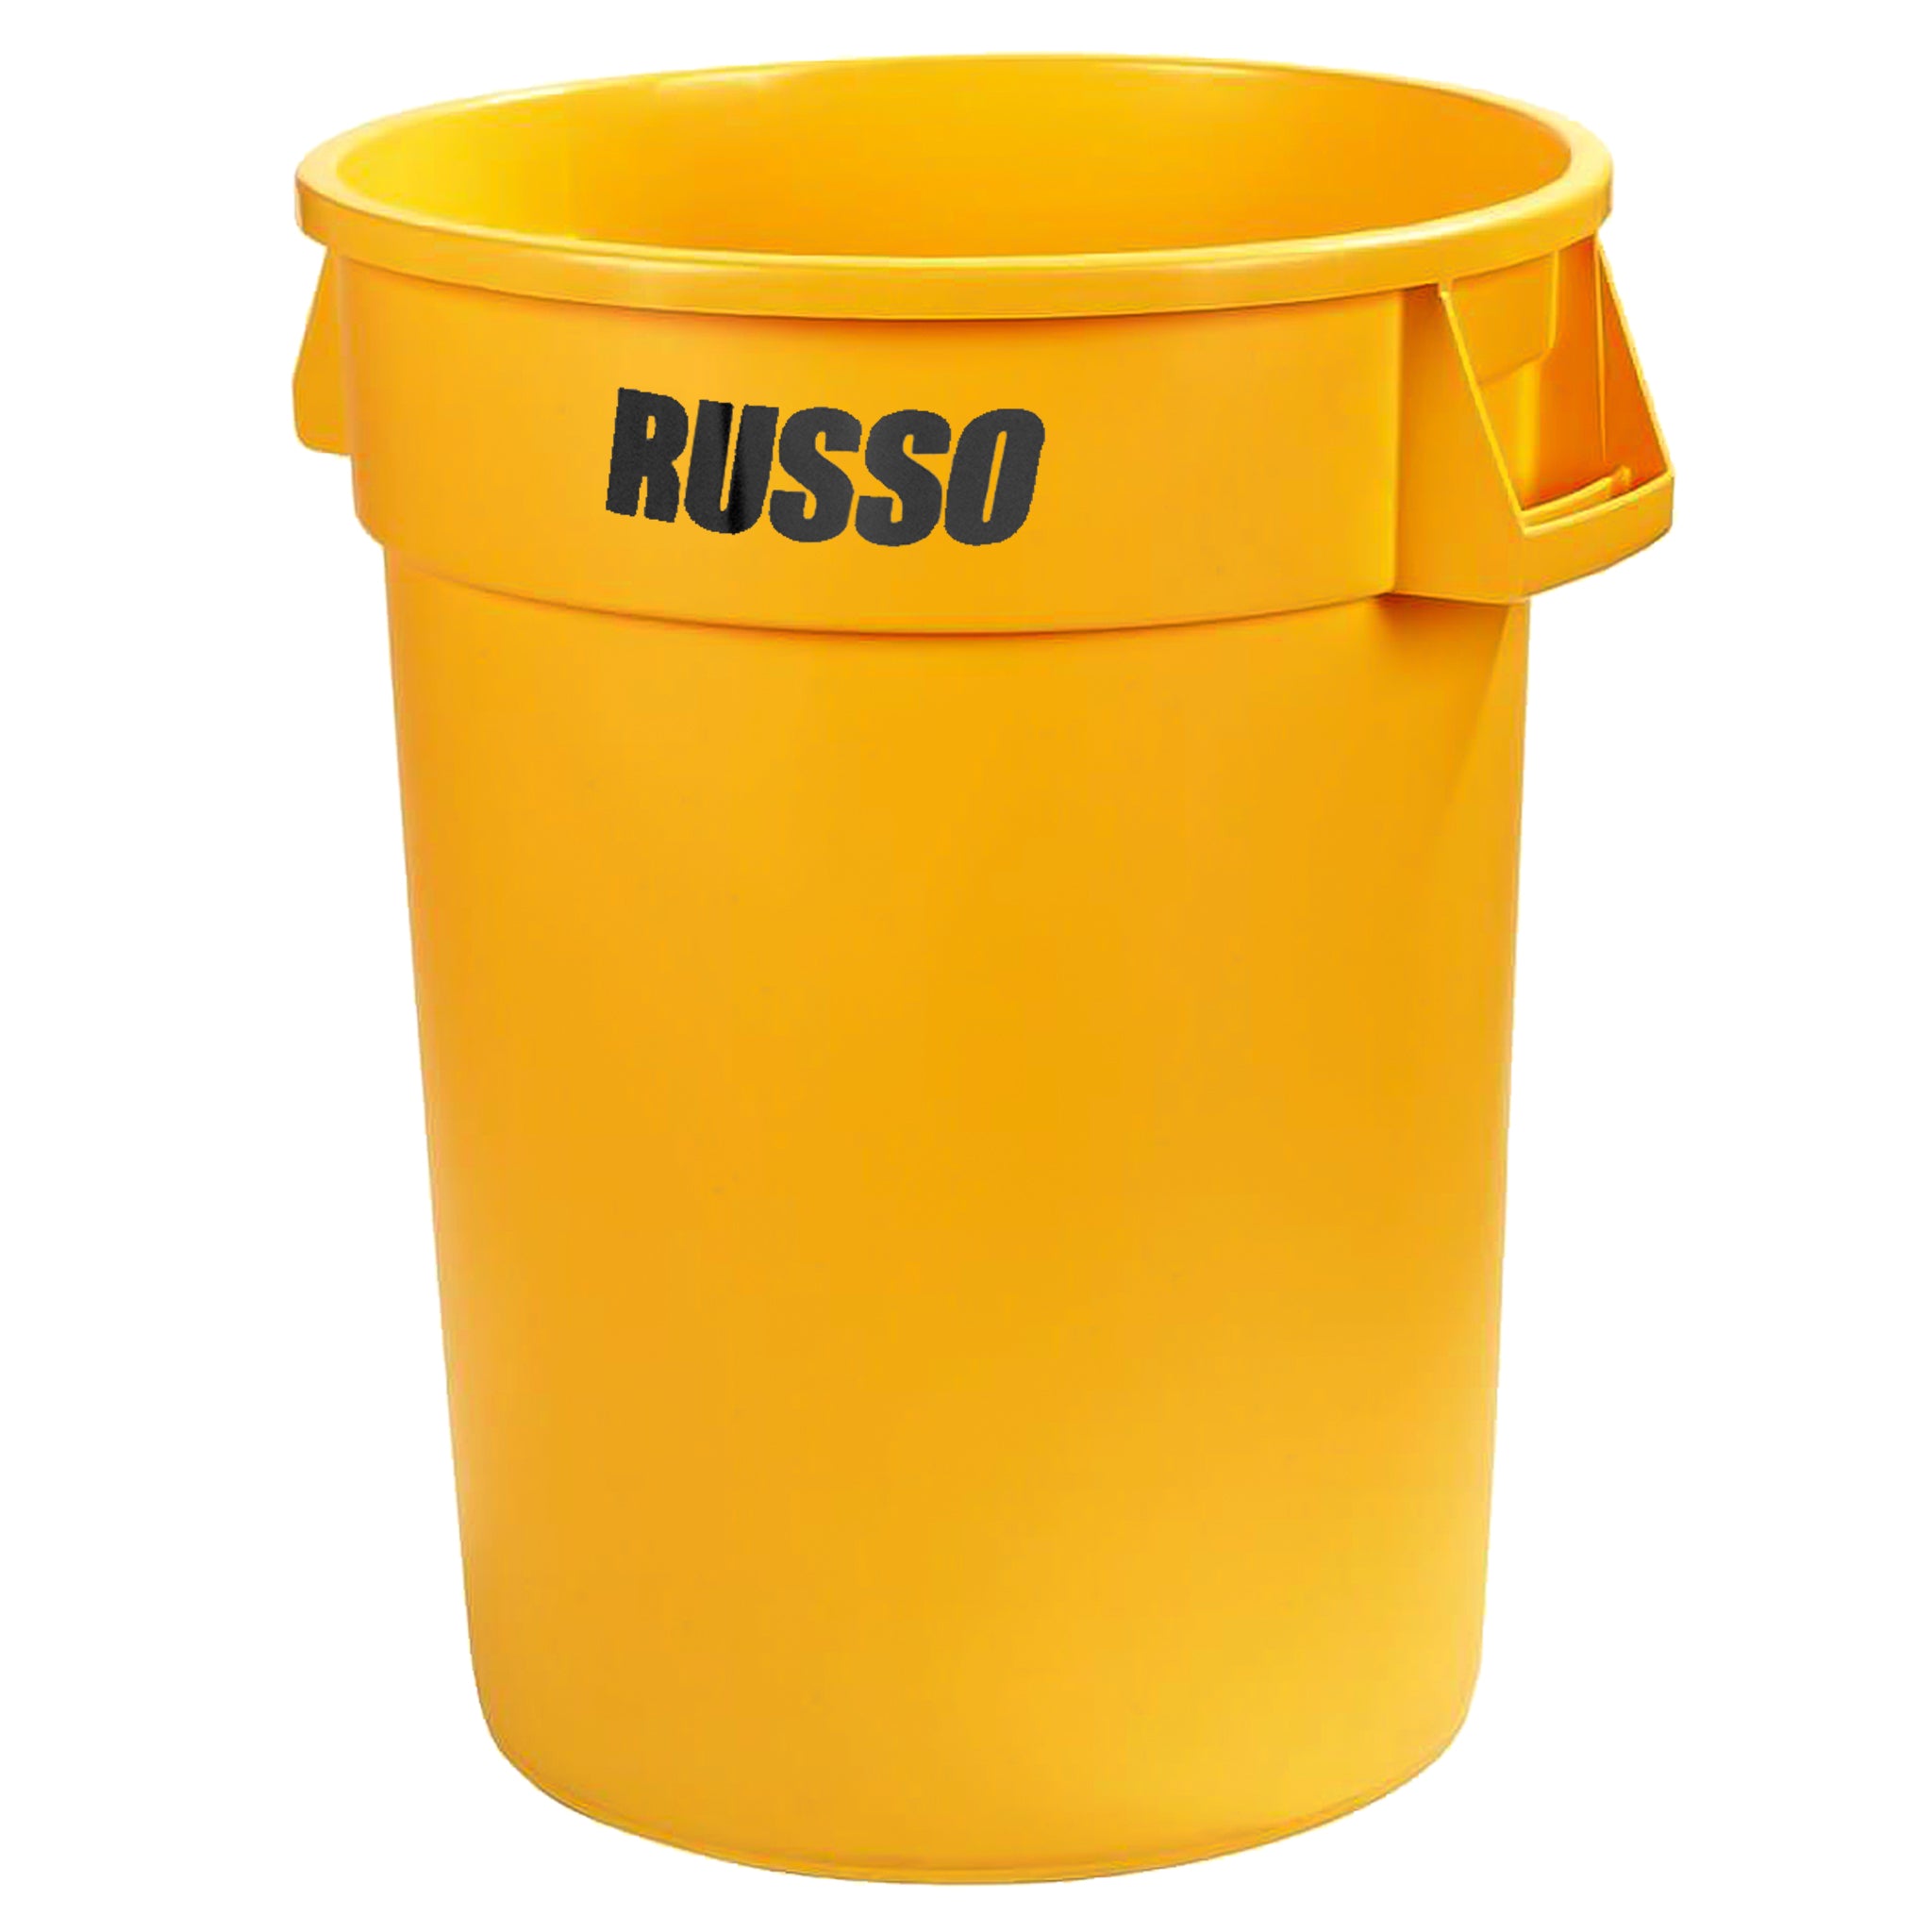 RUSSO 2642 Yellow Glow Can 32 Gallon